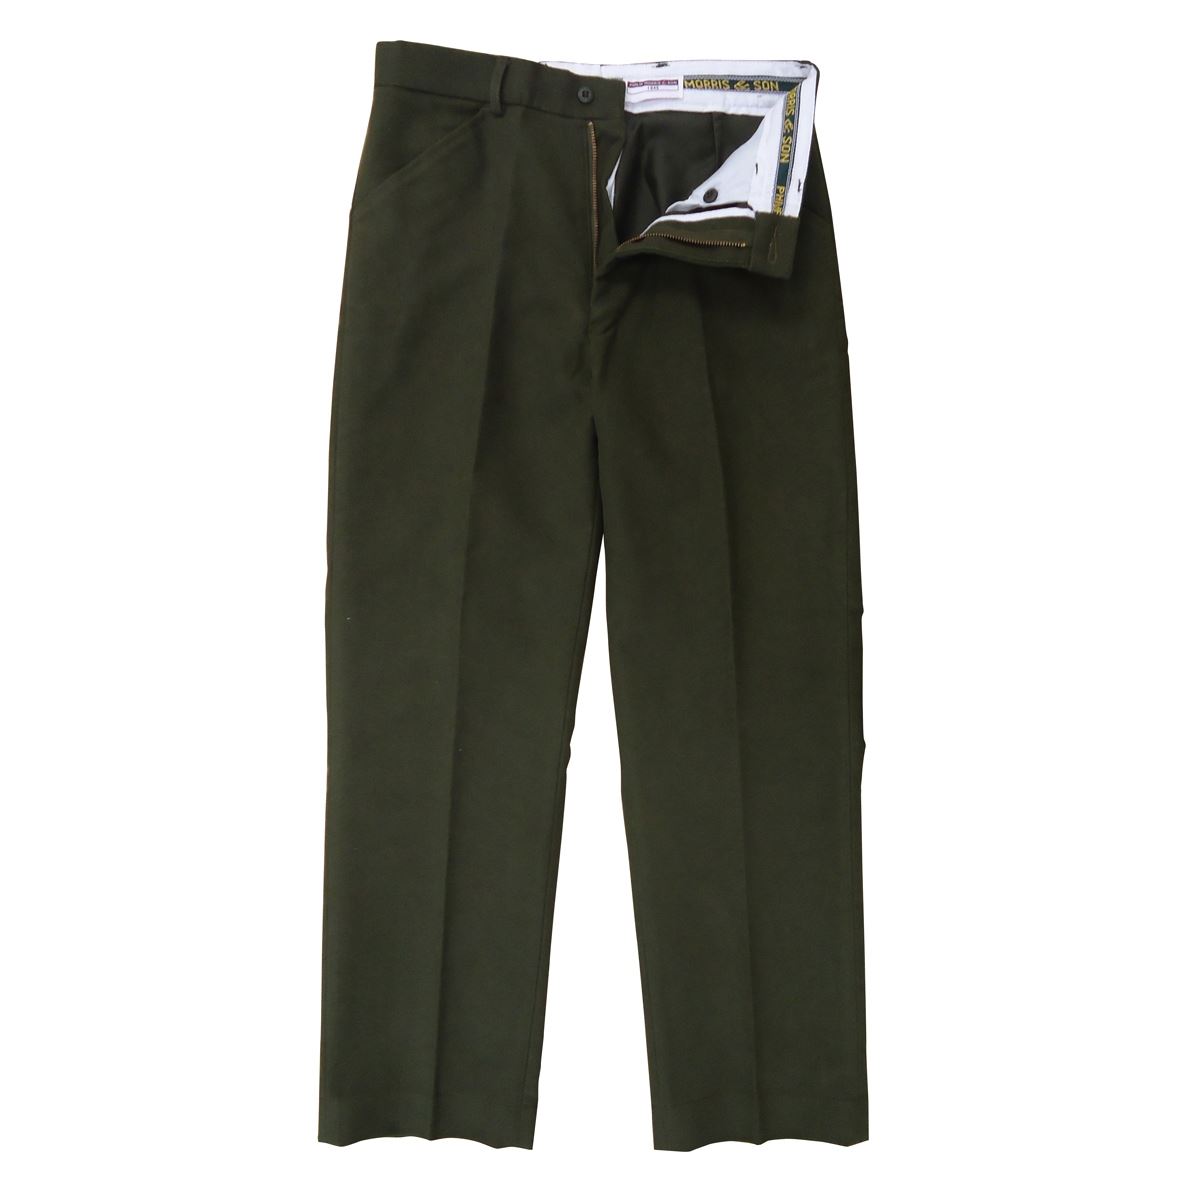 What material are the Heritage 1845 mens moleskin trousers made of?